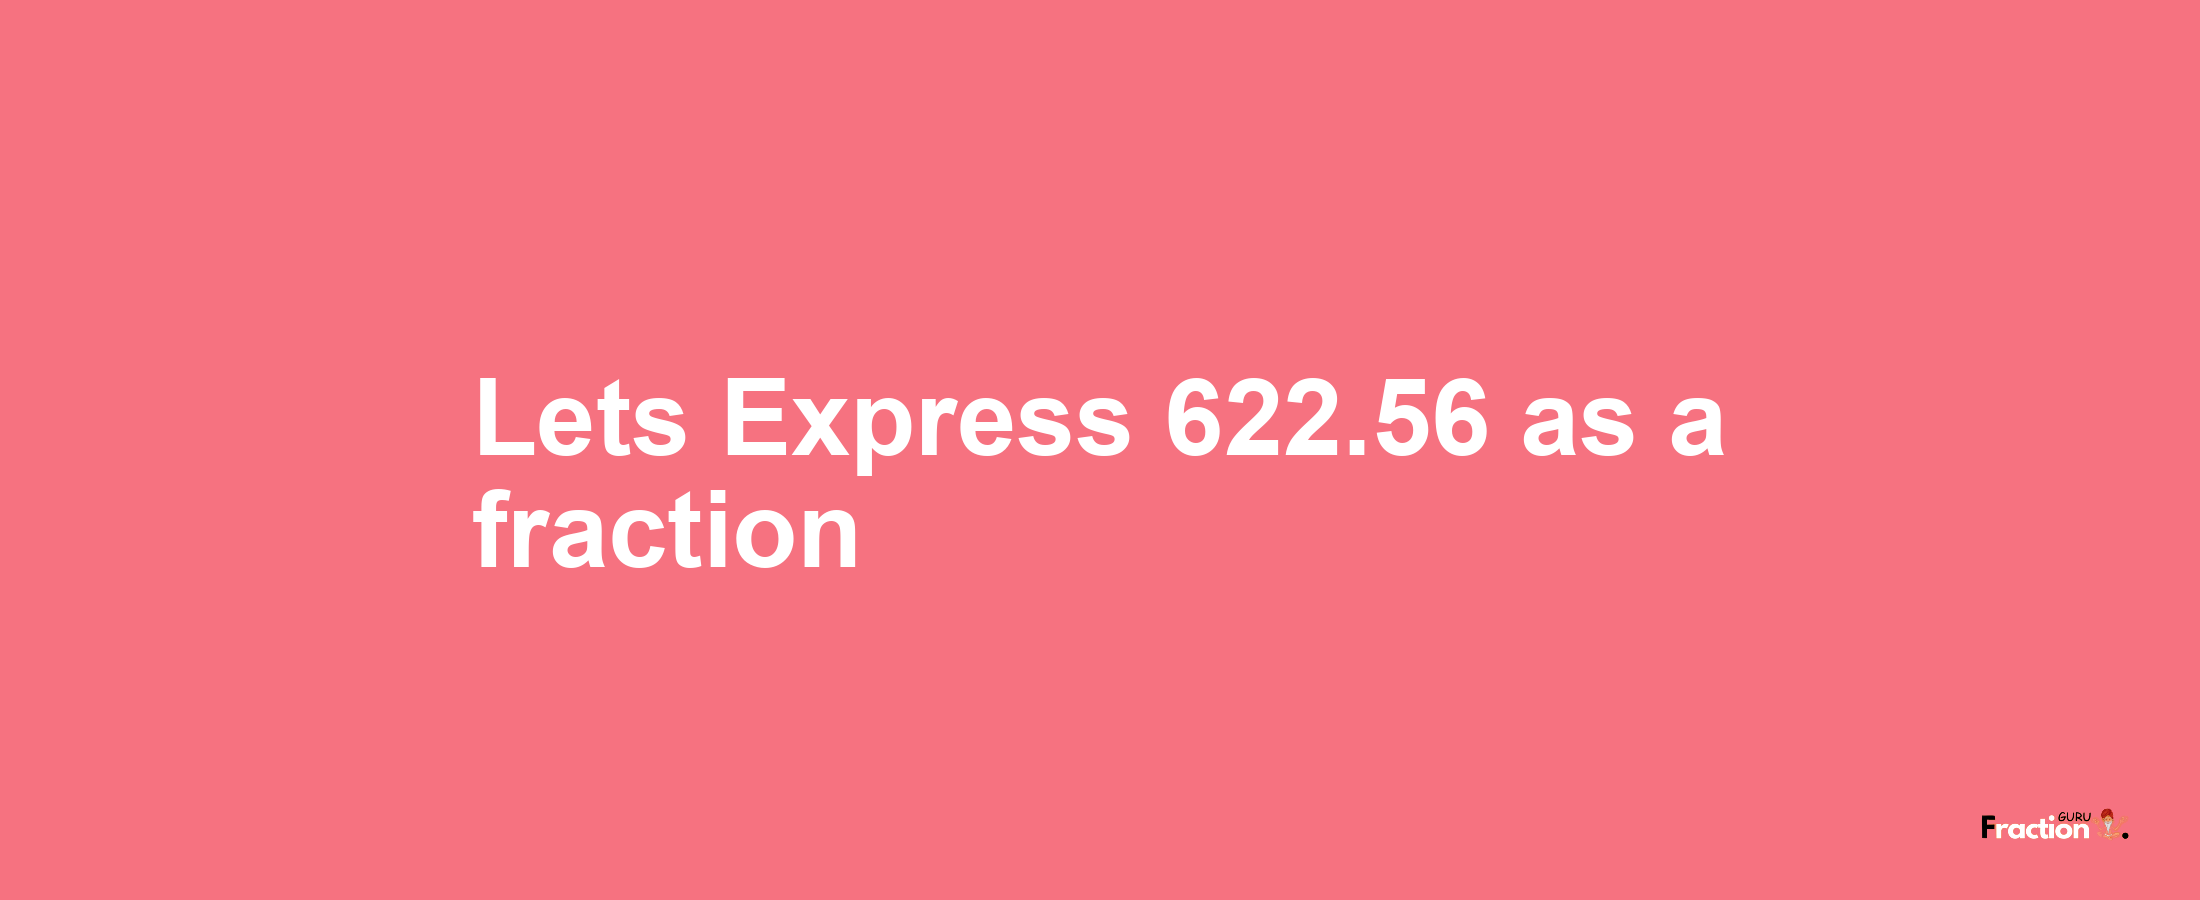 Lets Express 622.56 as afraction